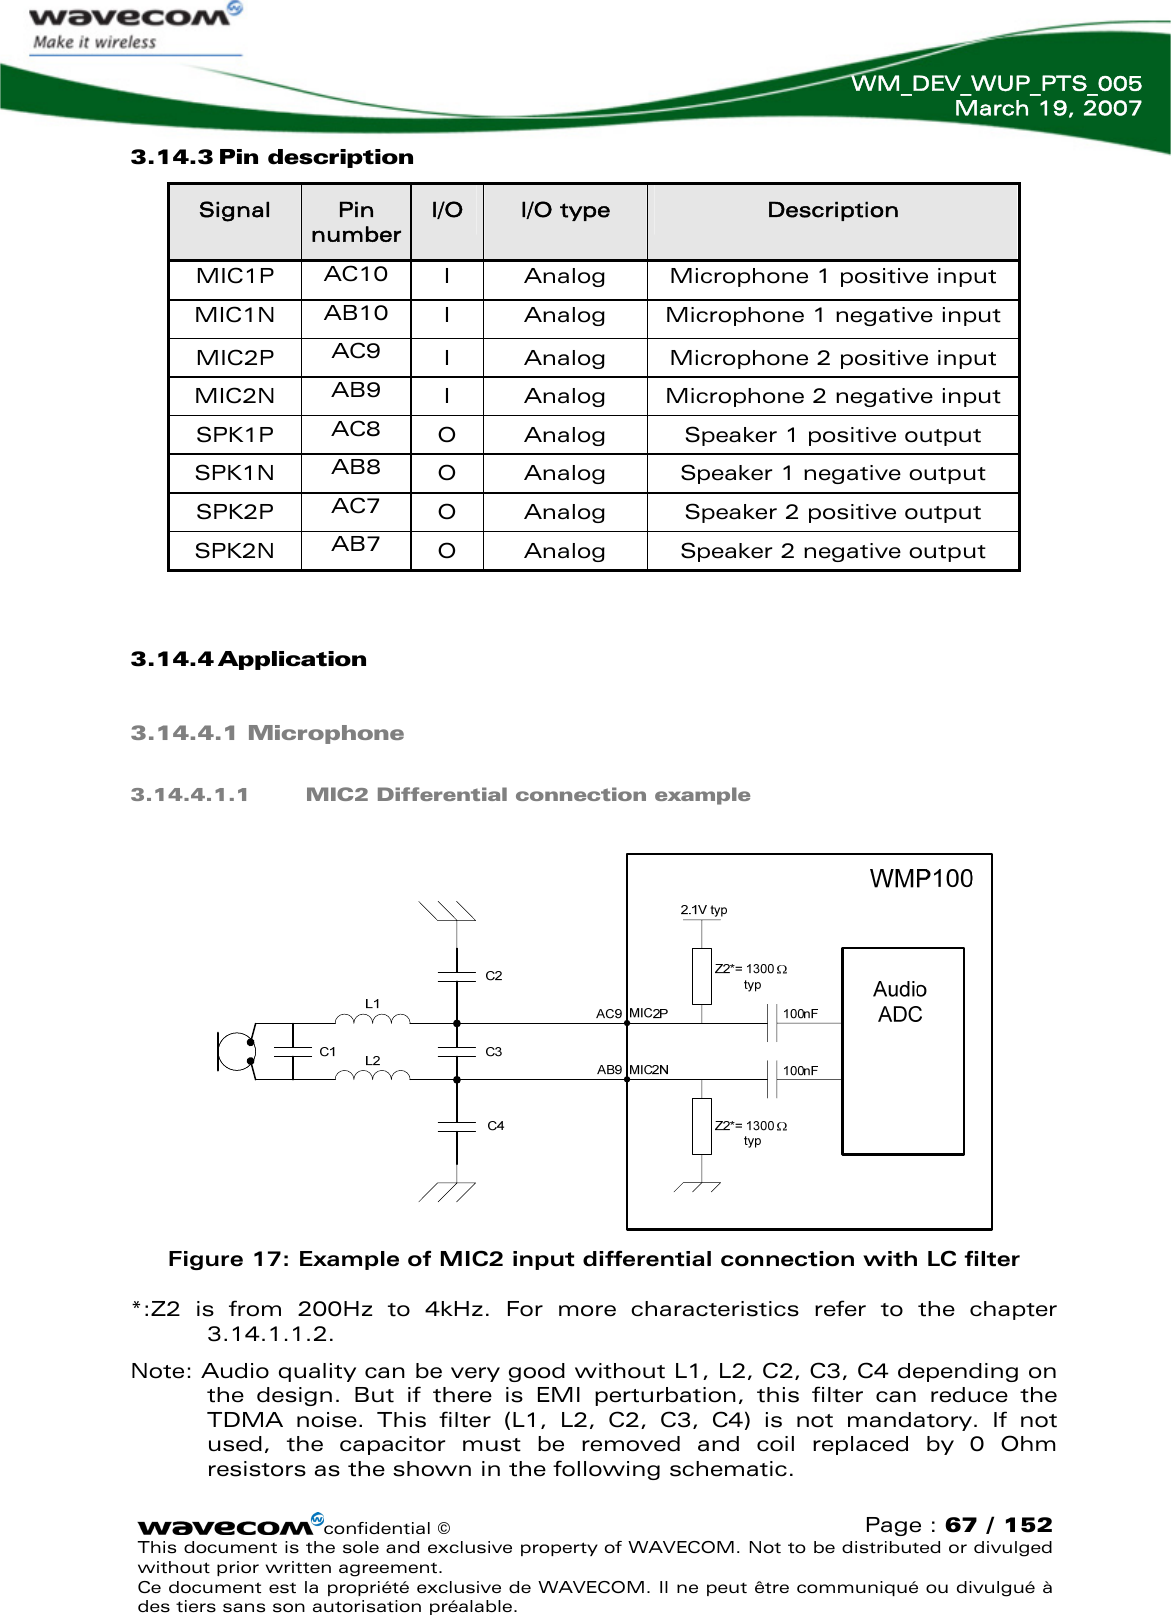   WM_DEV_WUP_PTS_005 March 19, 2007  3.14.3 Pin description  Signal  Pin number I/O  I/O type  Description MIC1P  AC10  I  Analog  Microphone 1 positive input confidential © Page : 67 / 152 This document is the sole and exclusive property of WAVECOM. Not to be distributed or divulged without prior written agreement.  Ce document est la propriété exclusive de WAVECOM. Il ne peut être communiqué ou divulgué à des tiers sans son autorisation préalable.  MIC1N  AB10  I  Analog  Microphone 1 negative input MIC2P  AC9  I  Analog  Microphone 2 positive input MIC2N  AB9  I  Analog  Microphone 2 negative input SPK1P  AC8  O  Analog  Speaker 1 positive output SPK1N  AB8  O  Analog  Speaker 1 negative output SPK2P  AC7  O  Analog  Speaker 2 positive output SPK2N  AB7  O  Analog  Speaker 2 negative output  3.14.4 Application 3.14.4.1 Microphone 3.14.4.1.1 MIC2 Differential connection example     Figure 17: Example of MIC2 input differential connection with LC filter *:Z2 is from 200Hz to 4kHz. For more characteristics refer to the chapter 3.14.1.1.2. Note: Audio quality can be very good without L1, L2, C2, C3, C4 depending on the design. But if there is EMI perturbation, this filter can reduce the TDMA noise. This filter (L1, L2, C2, C3, C4) is not mandatory. If not used, the capacitor must be removed and coil replaced by 0 Ohm resistors as the shown in the following schematic. 